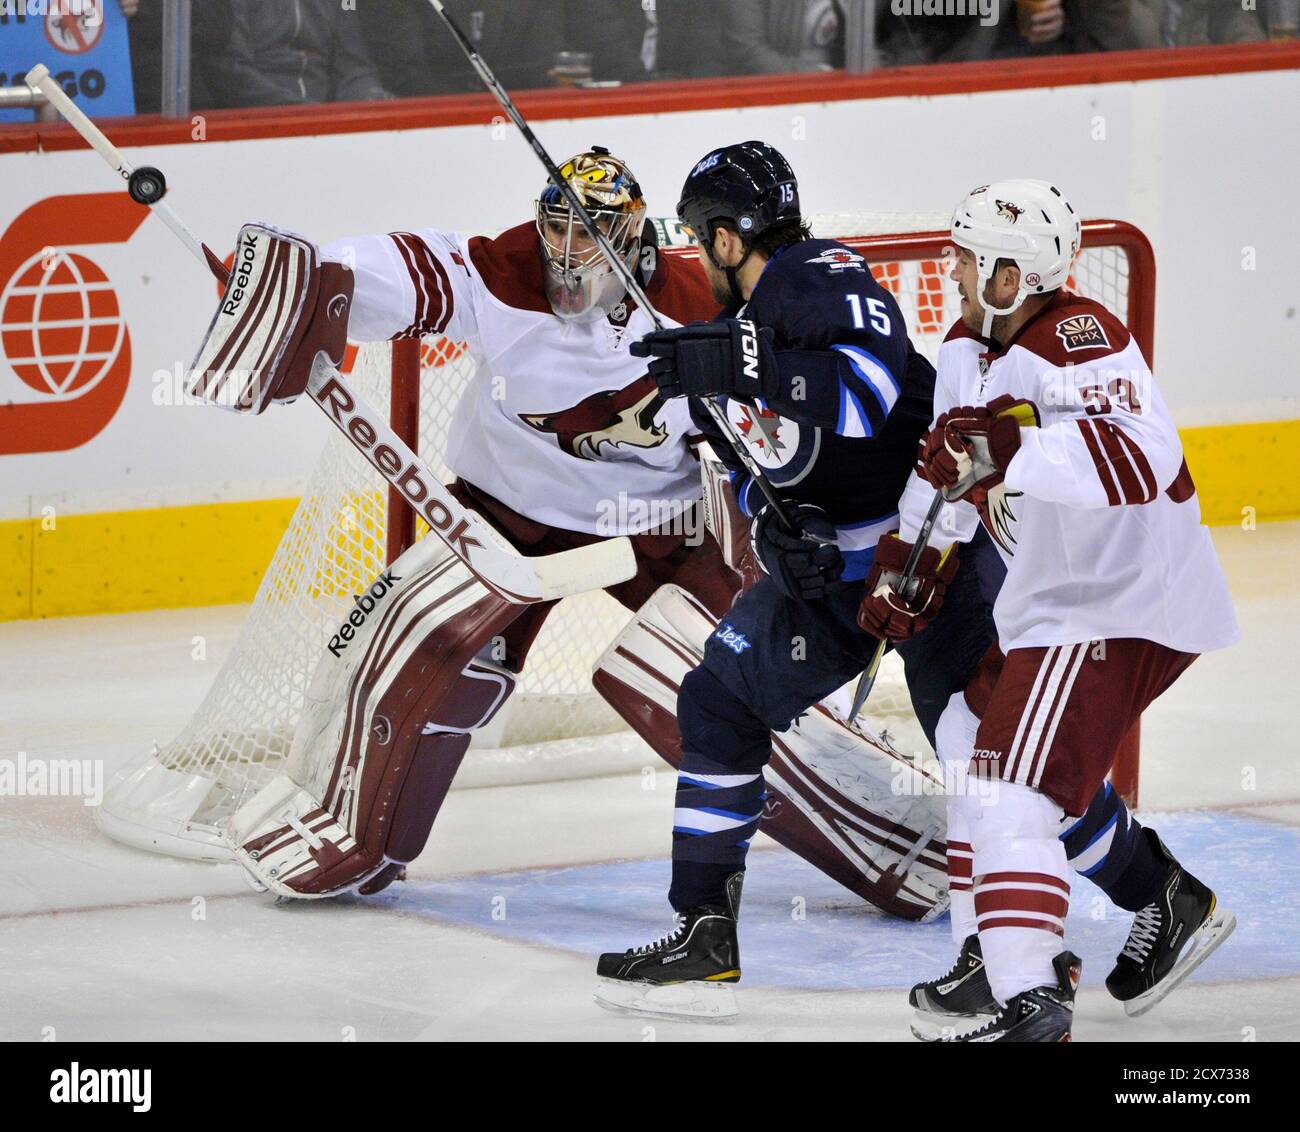 Phoenix Coyotes' goaltender Mike Smith makes a save on a Winnipeg Jets shot as Coyotes' Derek Morris (R) checks Winnipeg Jets' Tanner Glass during the first period of their NHL hockey game in Winnipeg, December 1, 2011. REUTERS/Fred Greenslade  (CANADA - Tags: SPORT ICE HOCKEY) Stock Photo